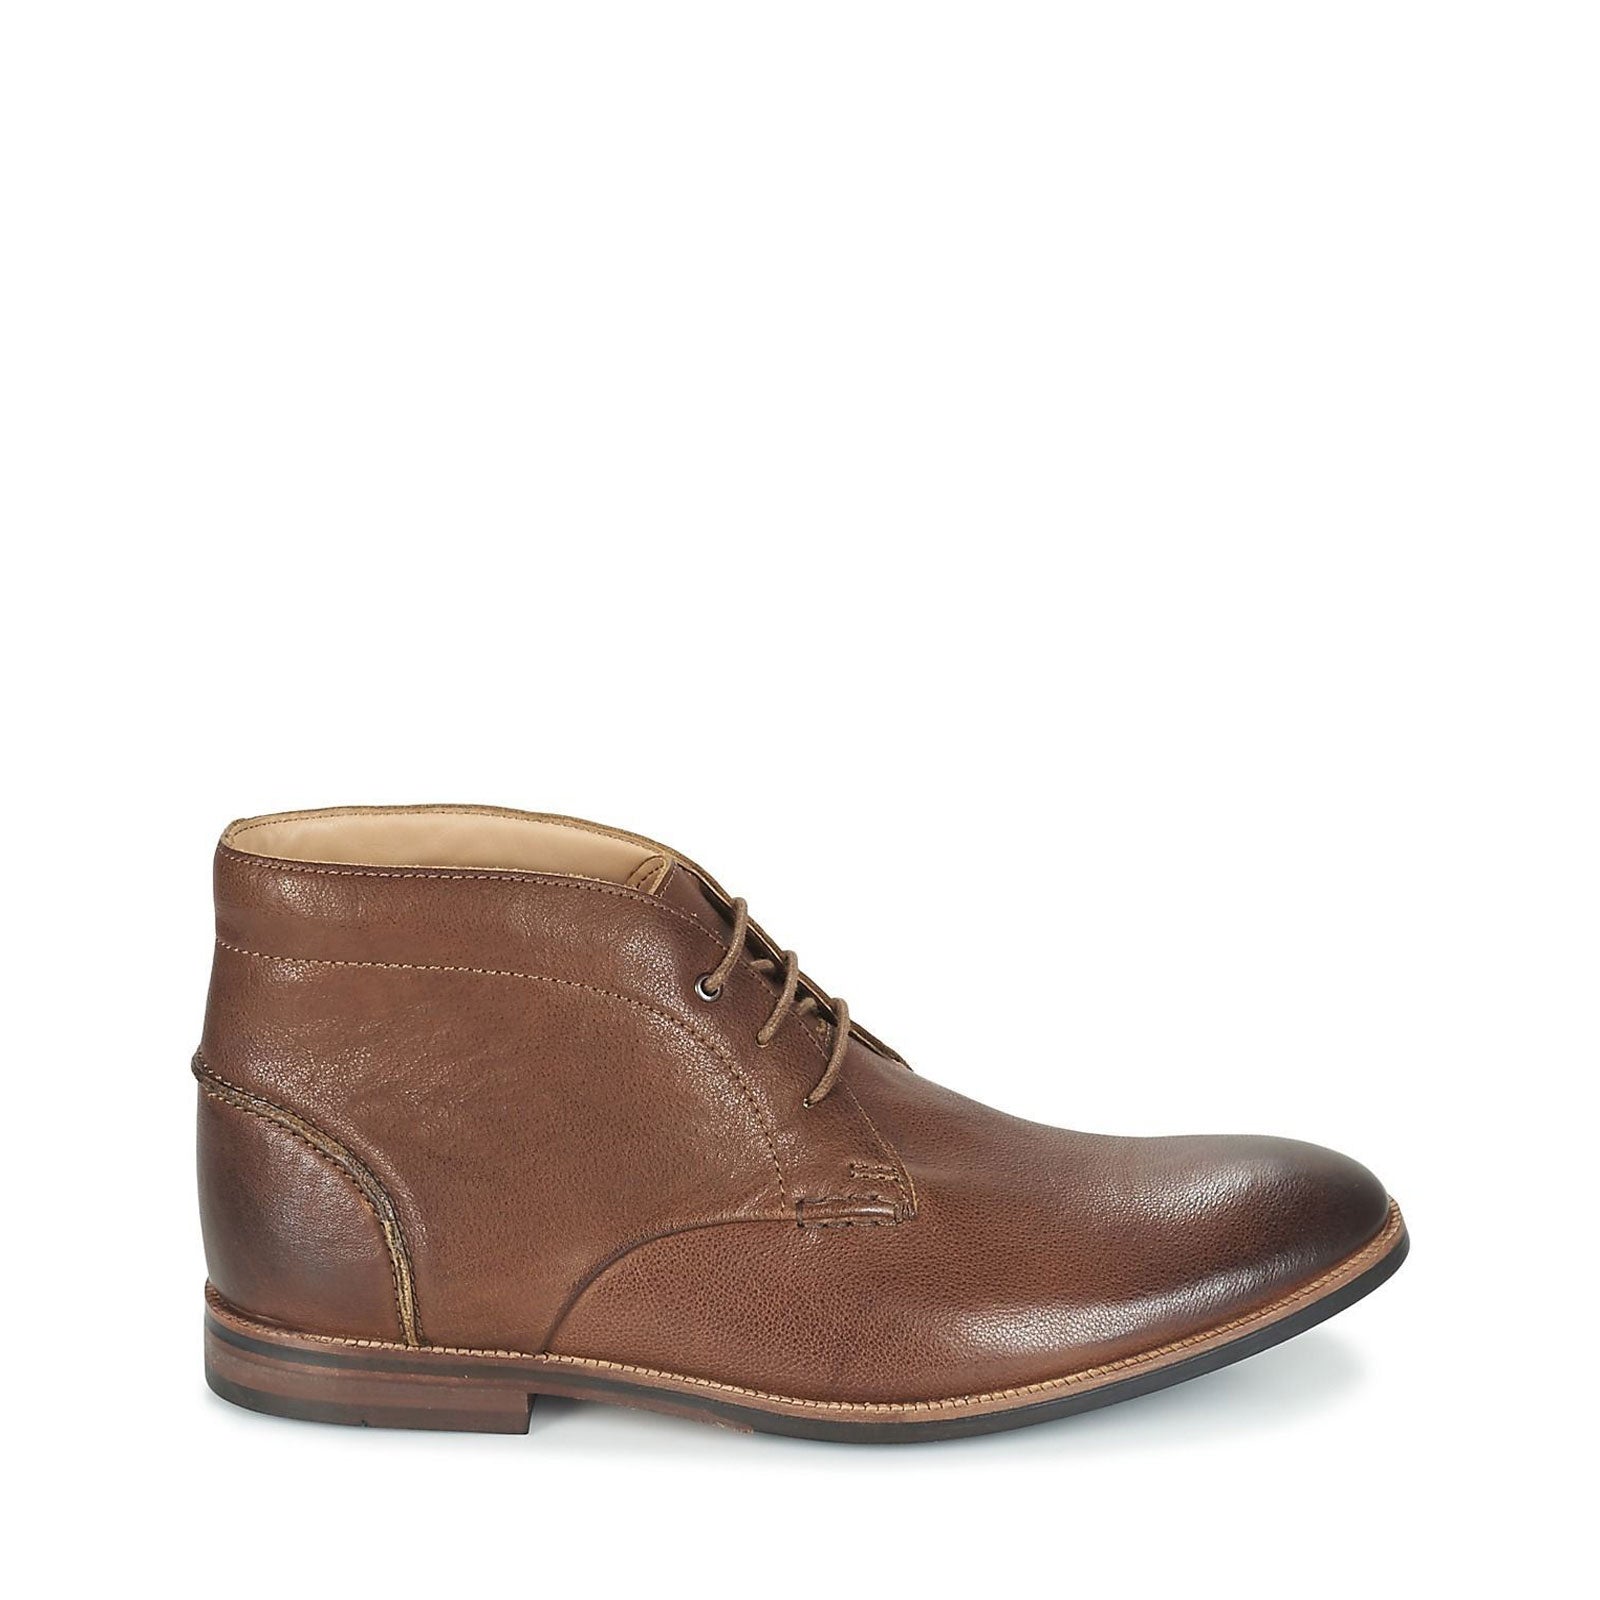 Clarks Broyd 23858 (Tan) Milano Shoes